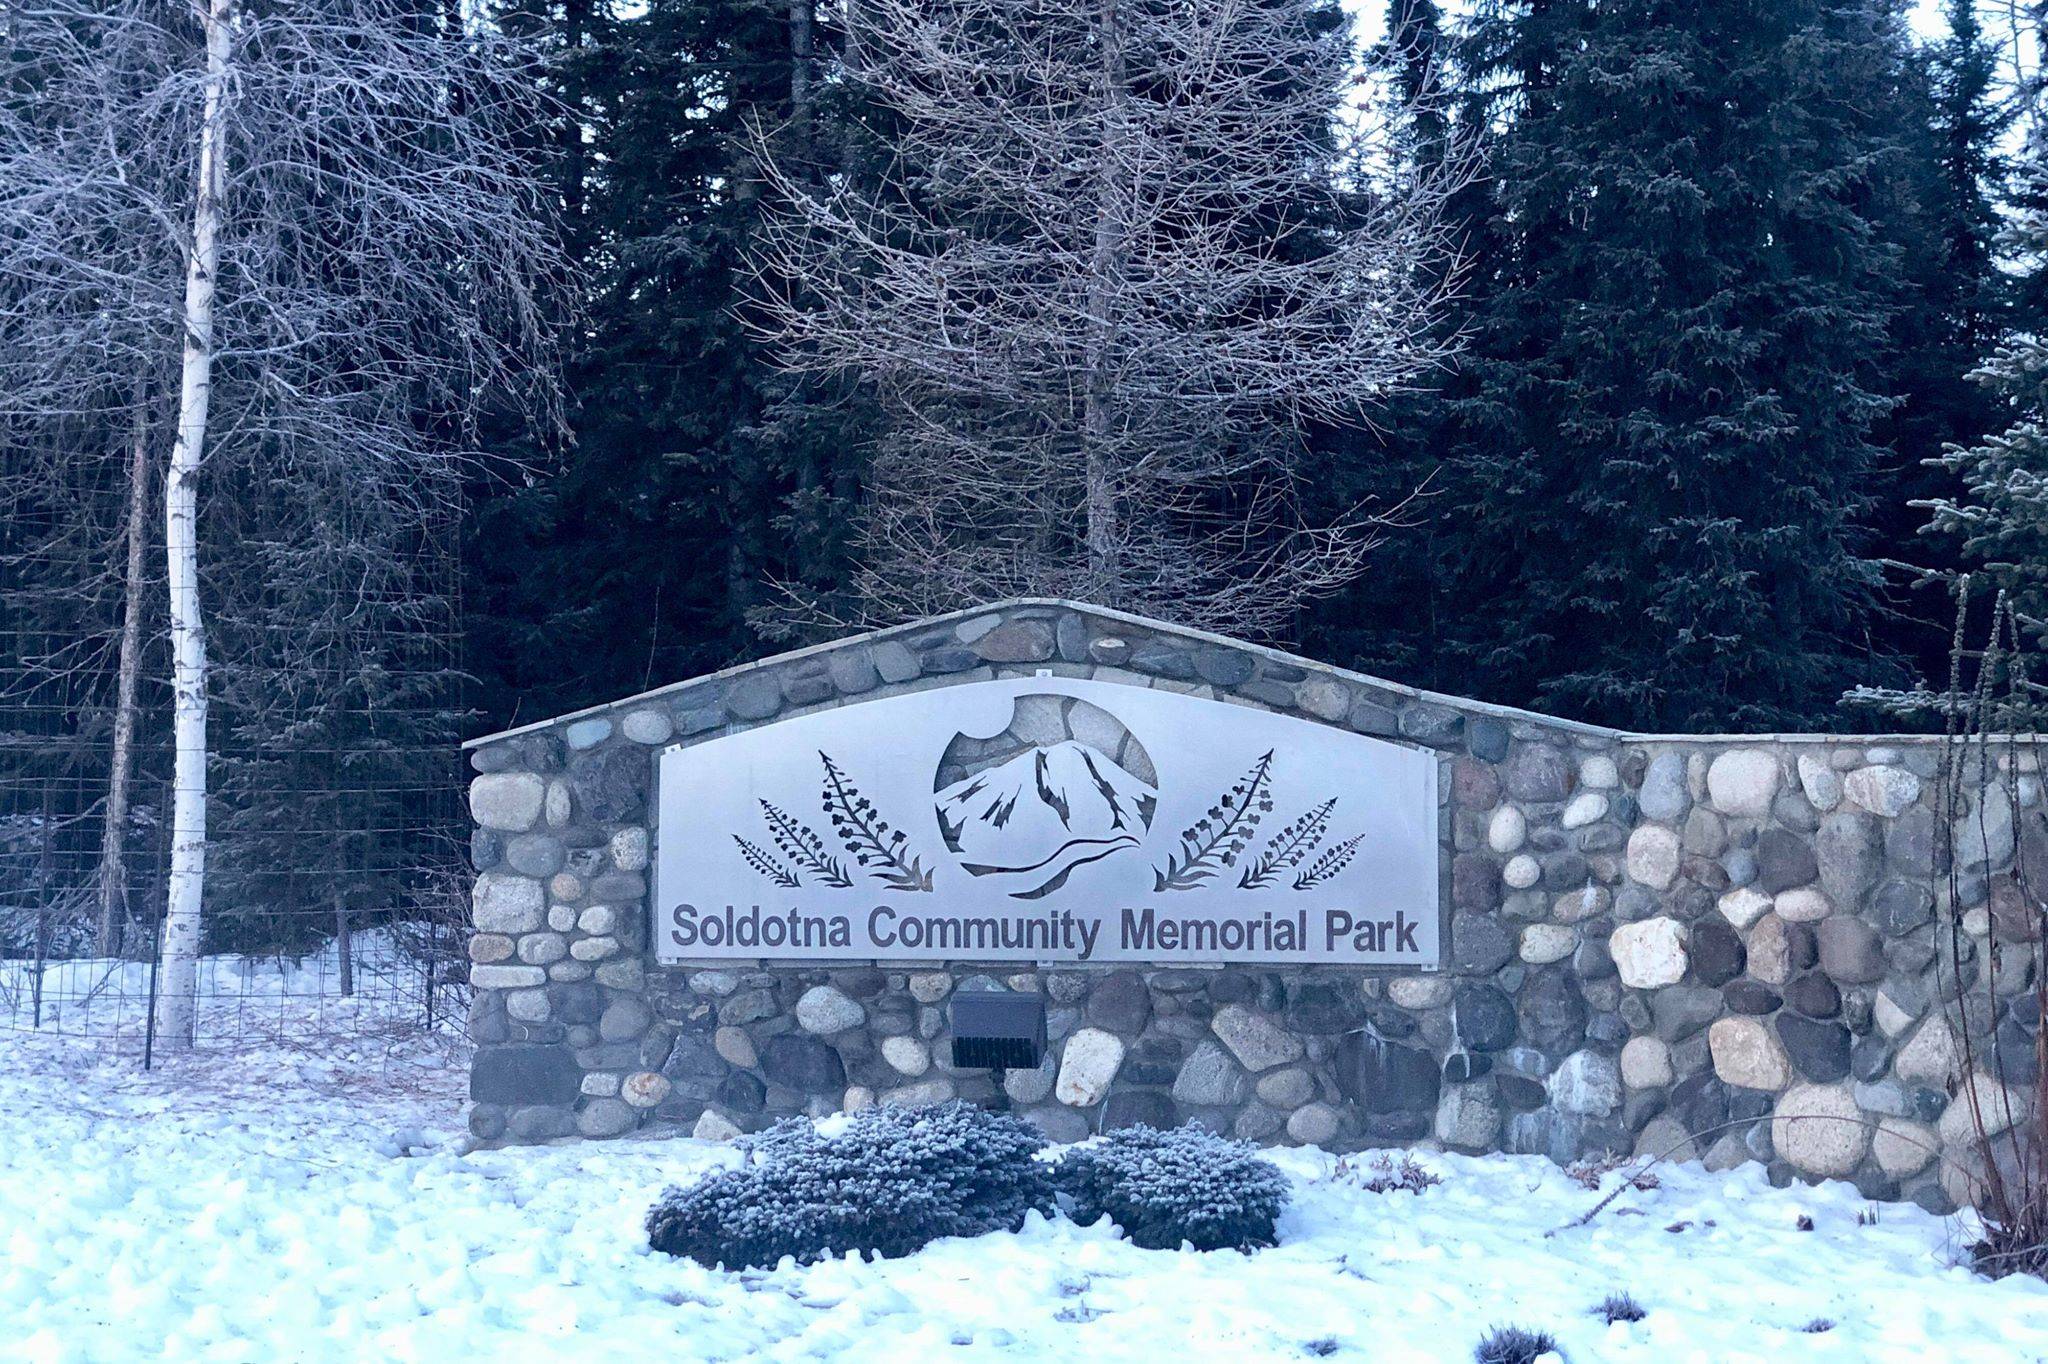 The entrance to Soldotna Community Memorial Park off of Redoubt Avenue, in Soldotna, Alaska, on Dec. 20, 2019. (Photo by Victoria Petersen/Peninsula Clarion)